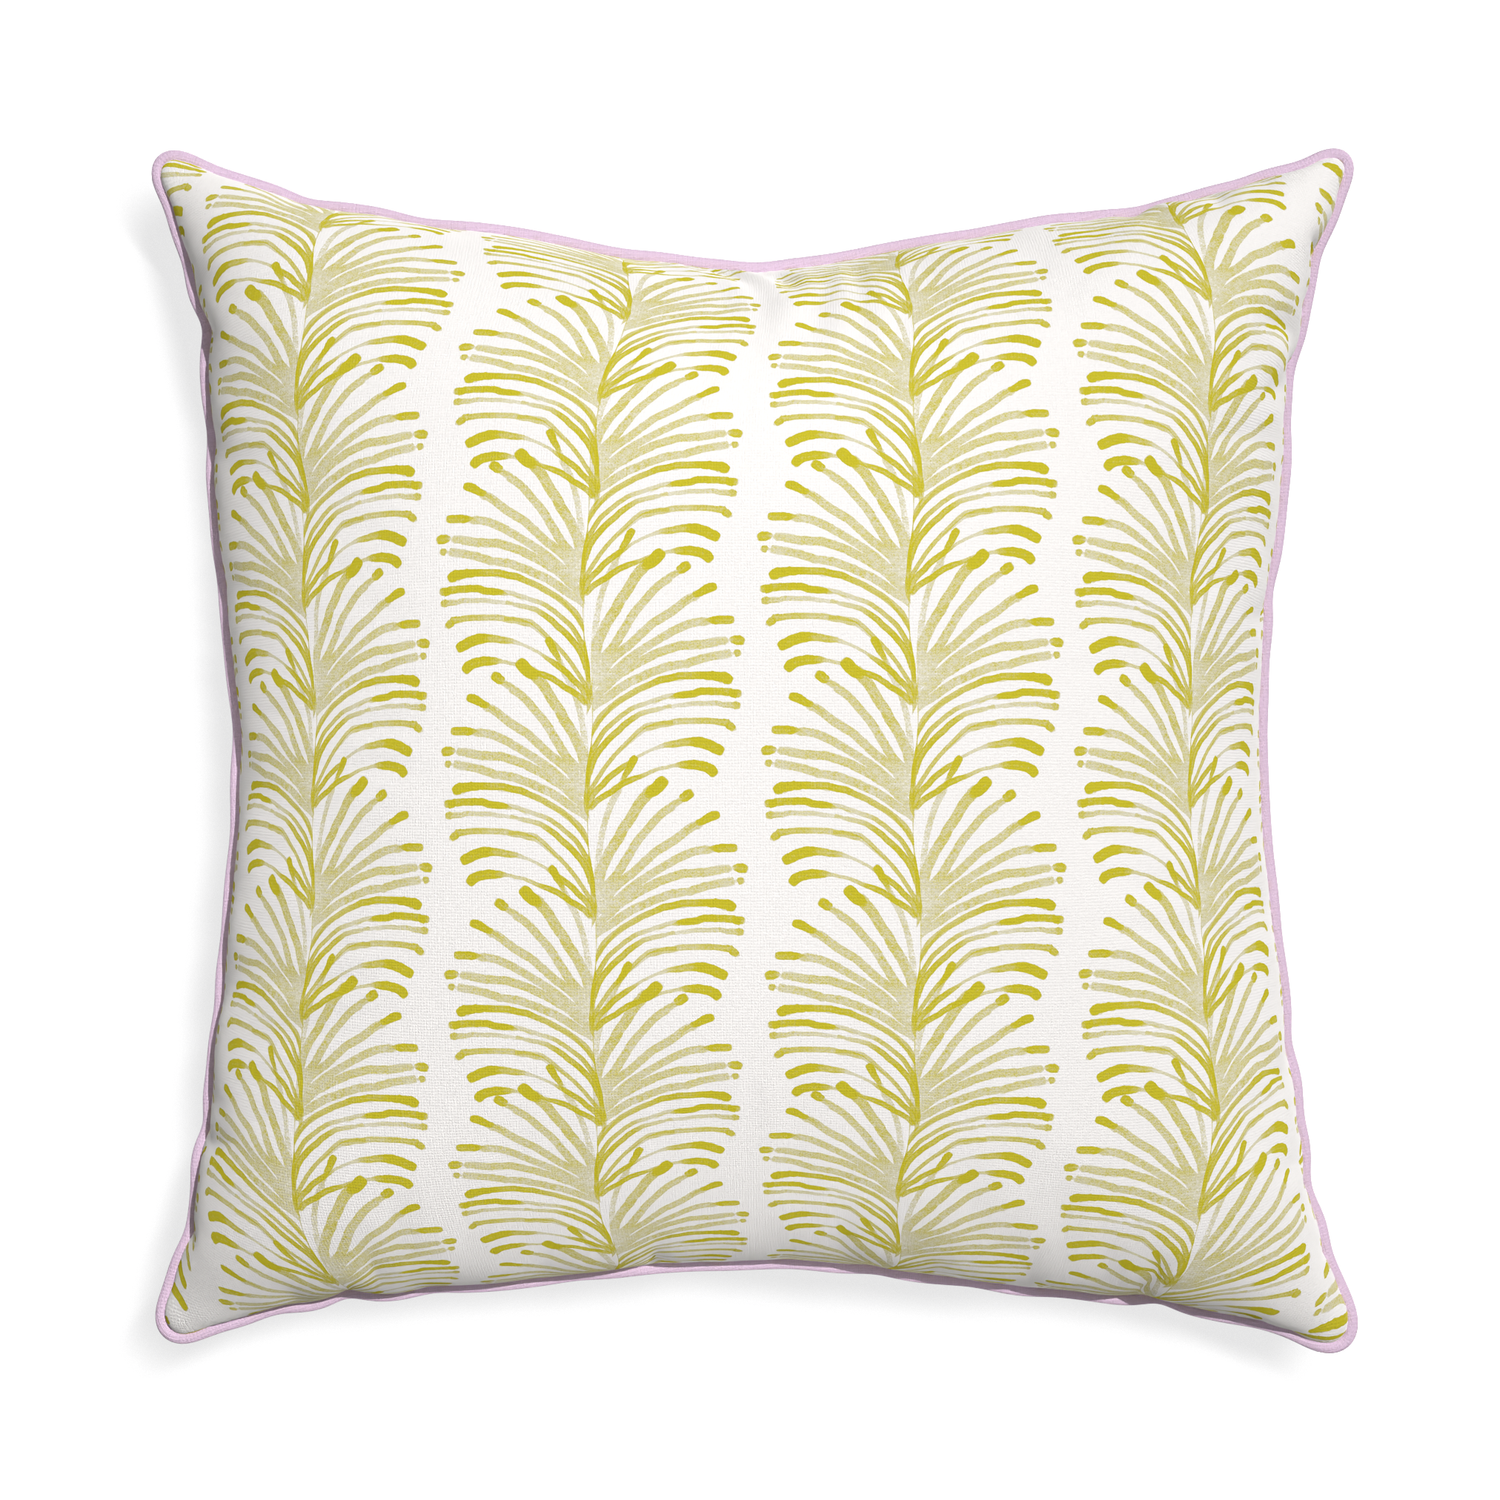 Euro-sham emma chartreuse custom pillow with l piping on white background